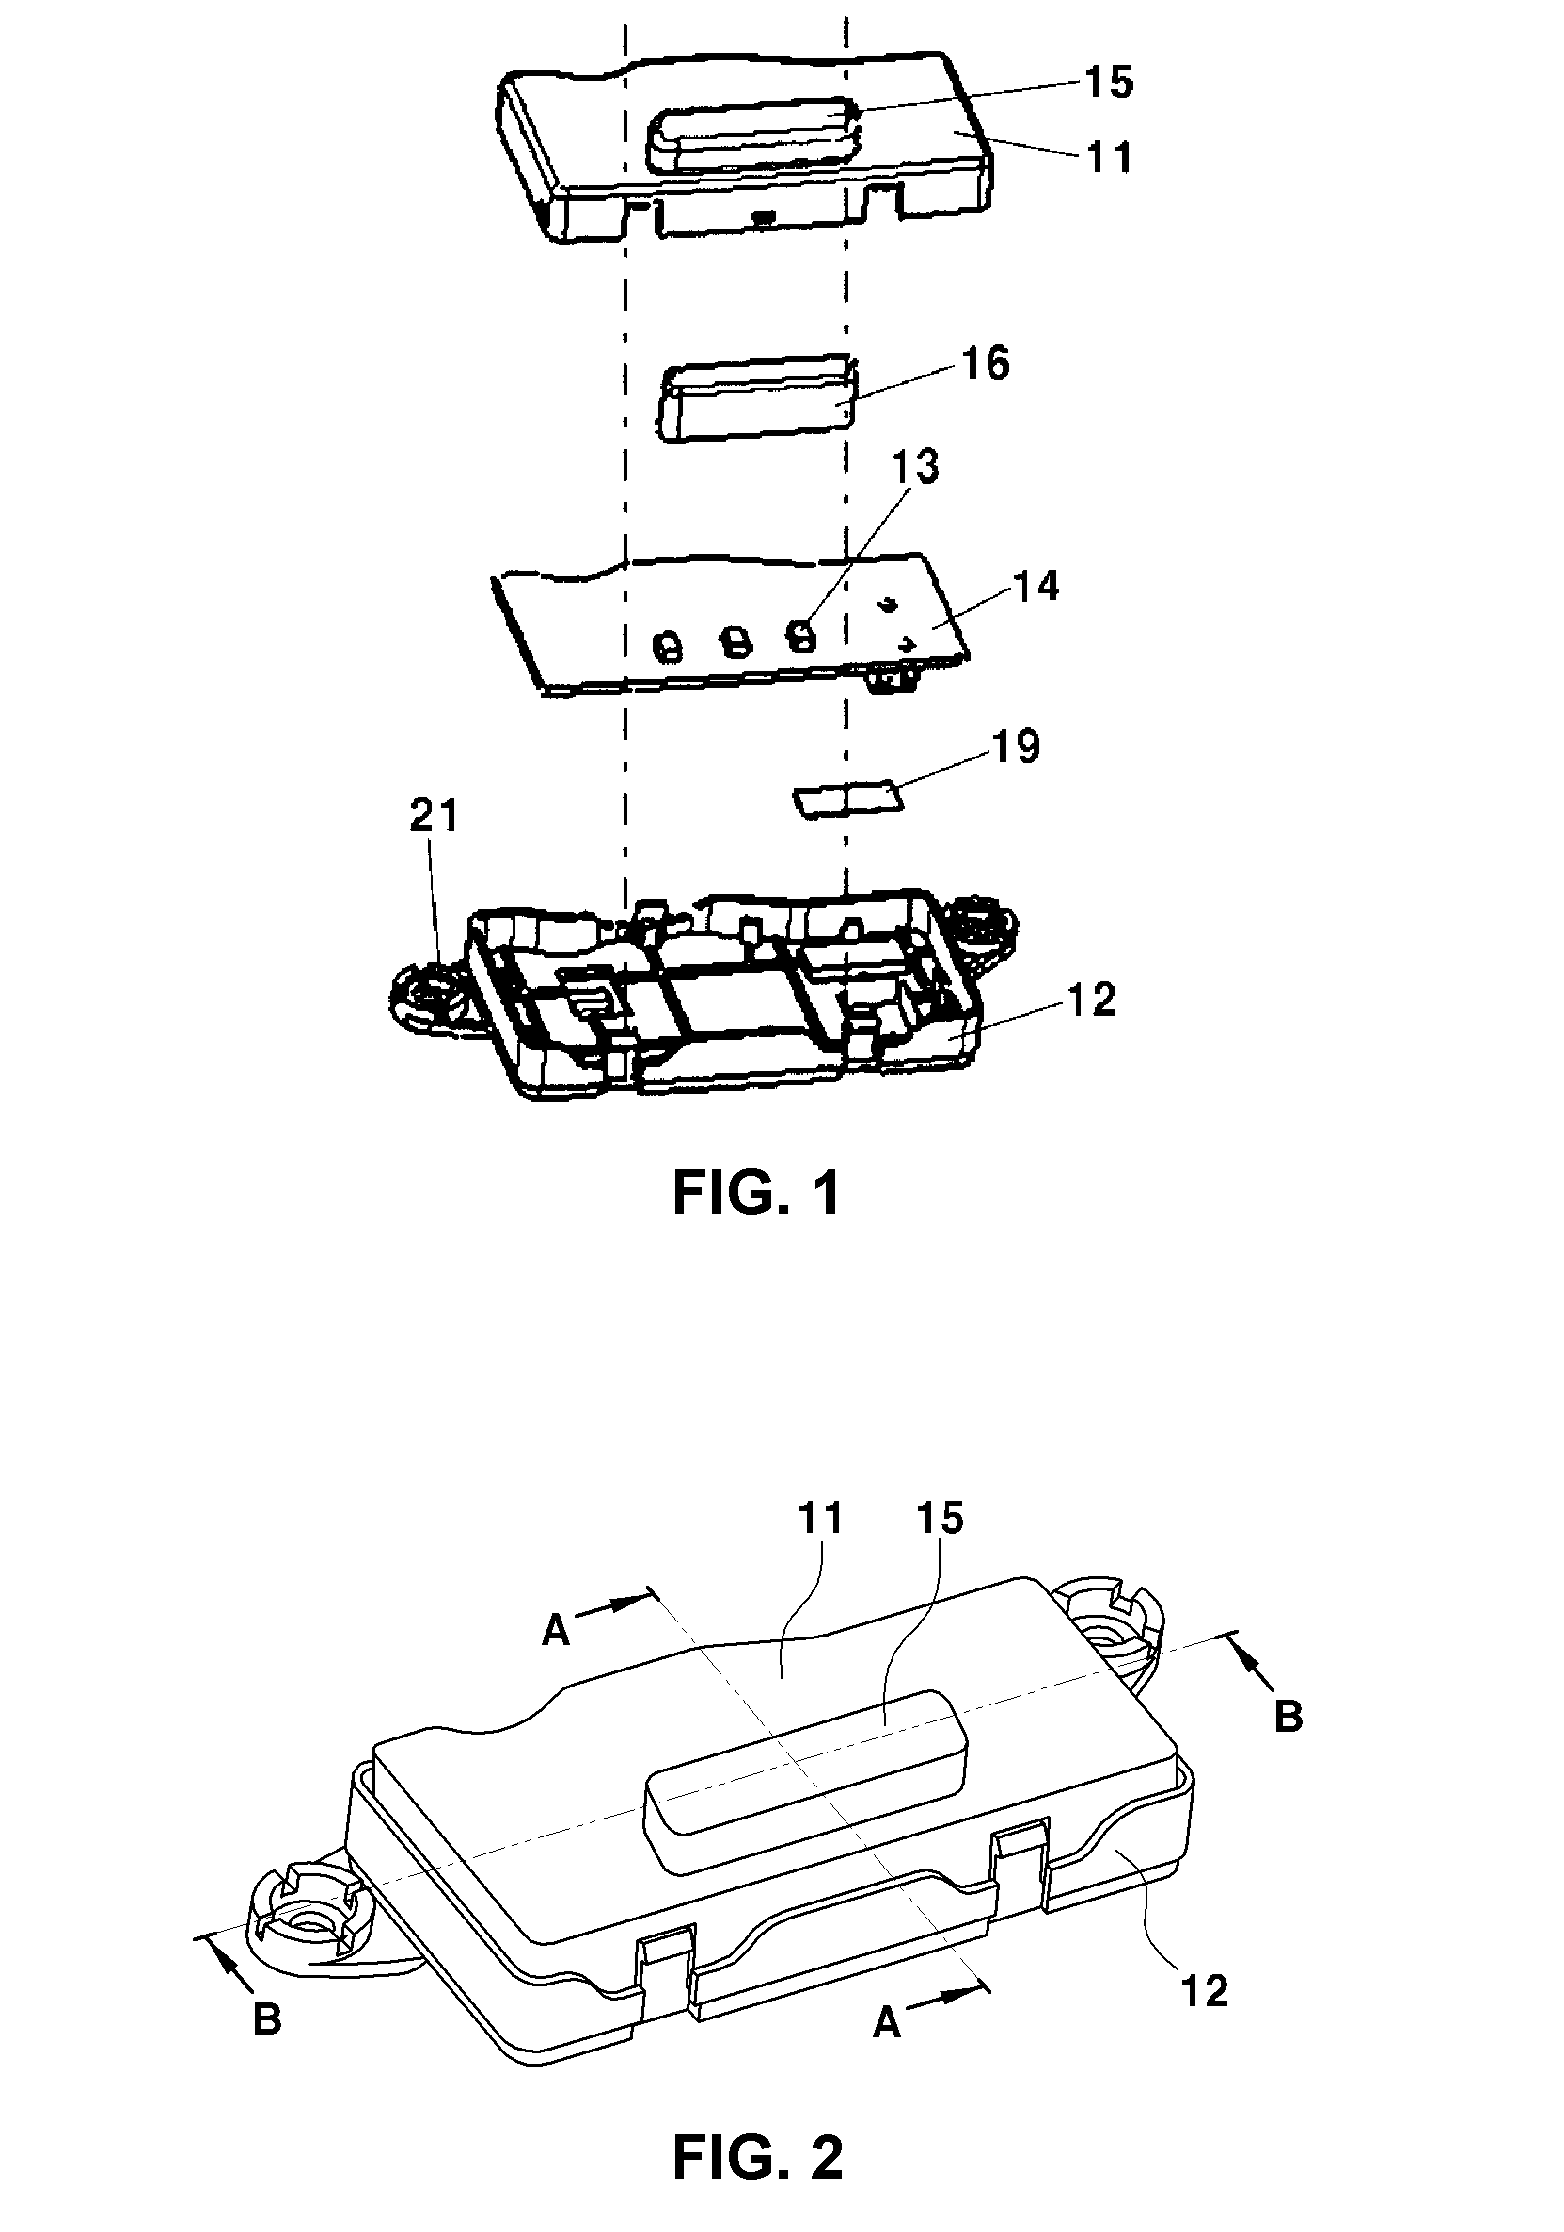 Battery charging status indicator for electric vehicle